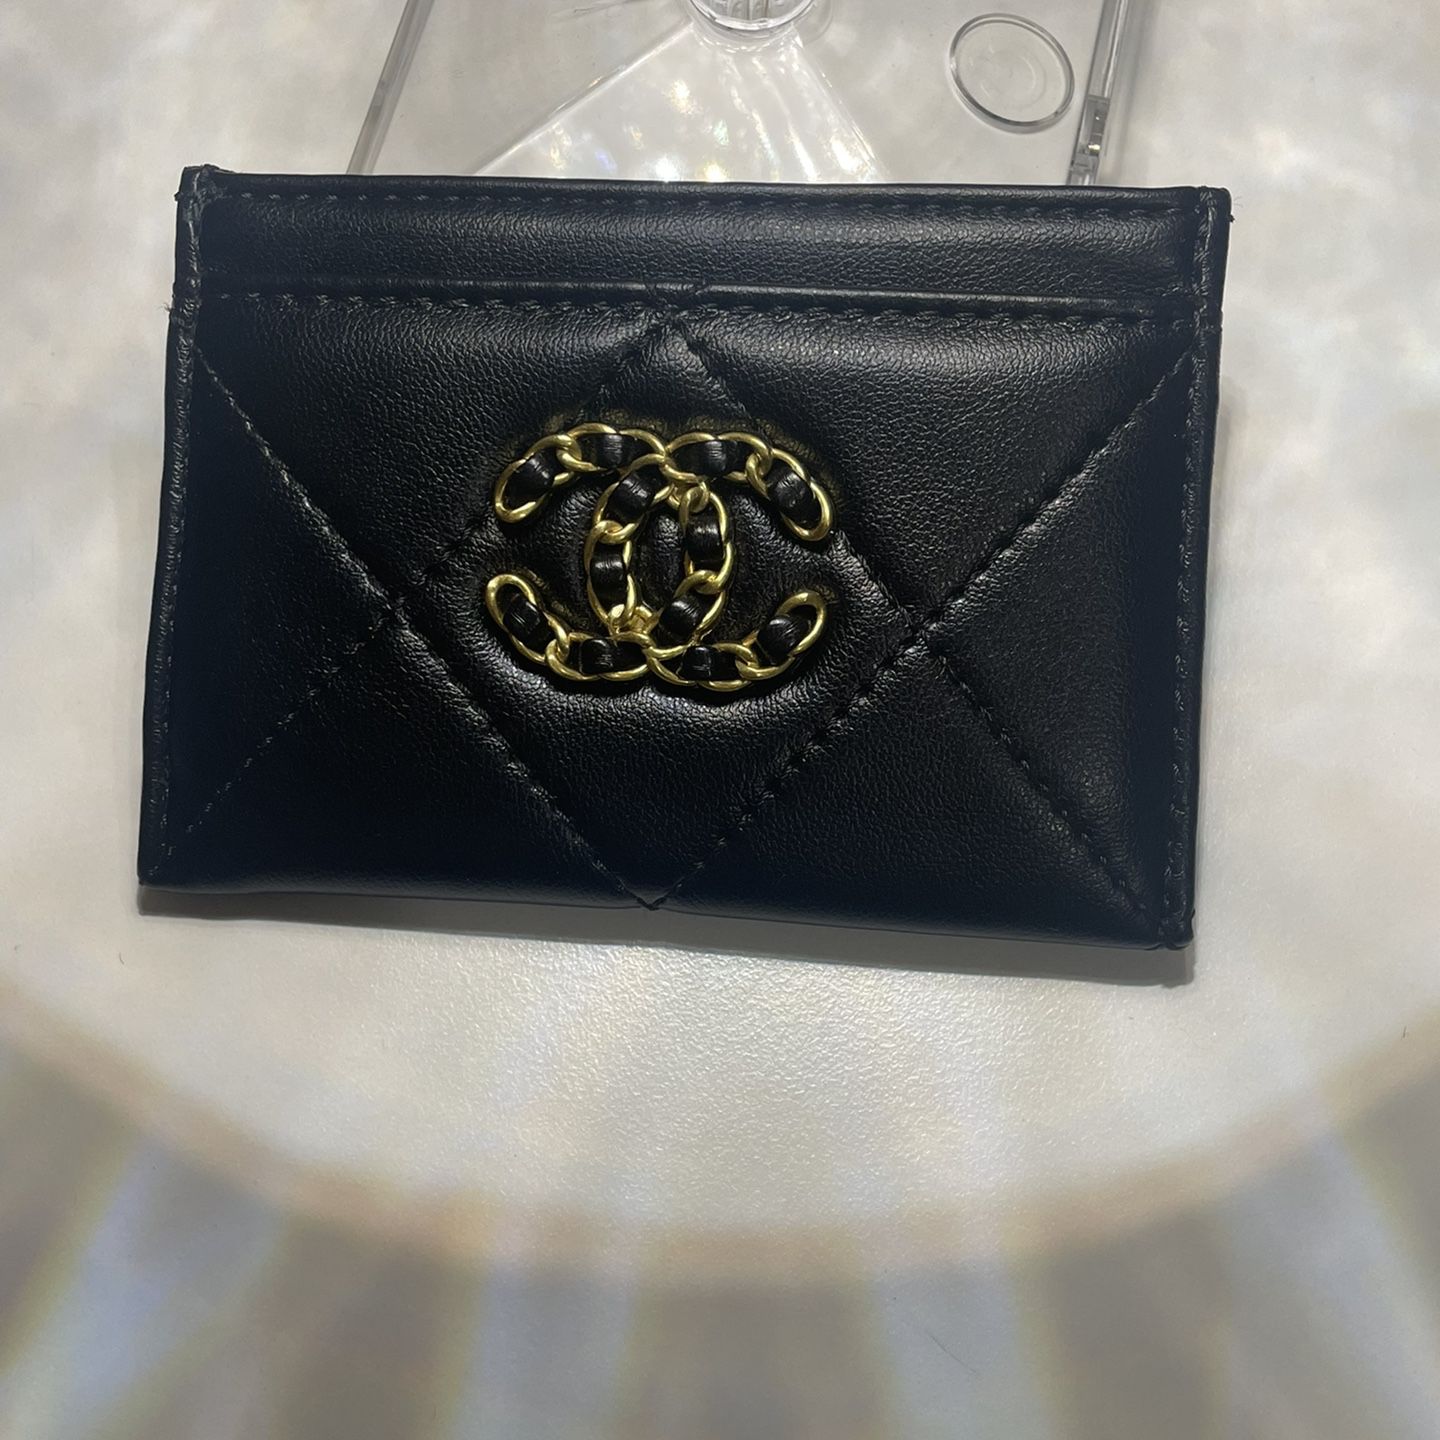 NEW- Authentic CHANEL Card Holder for Sale in Bothell, WA - OfferUp